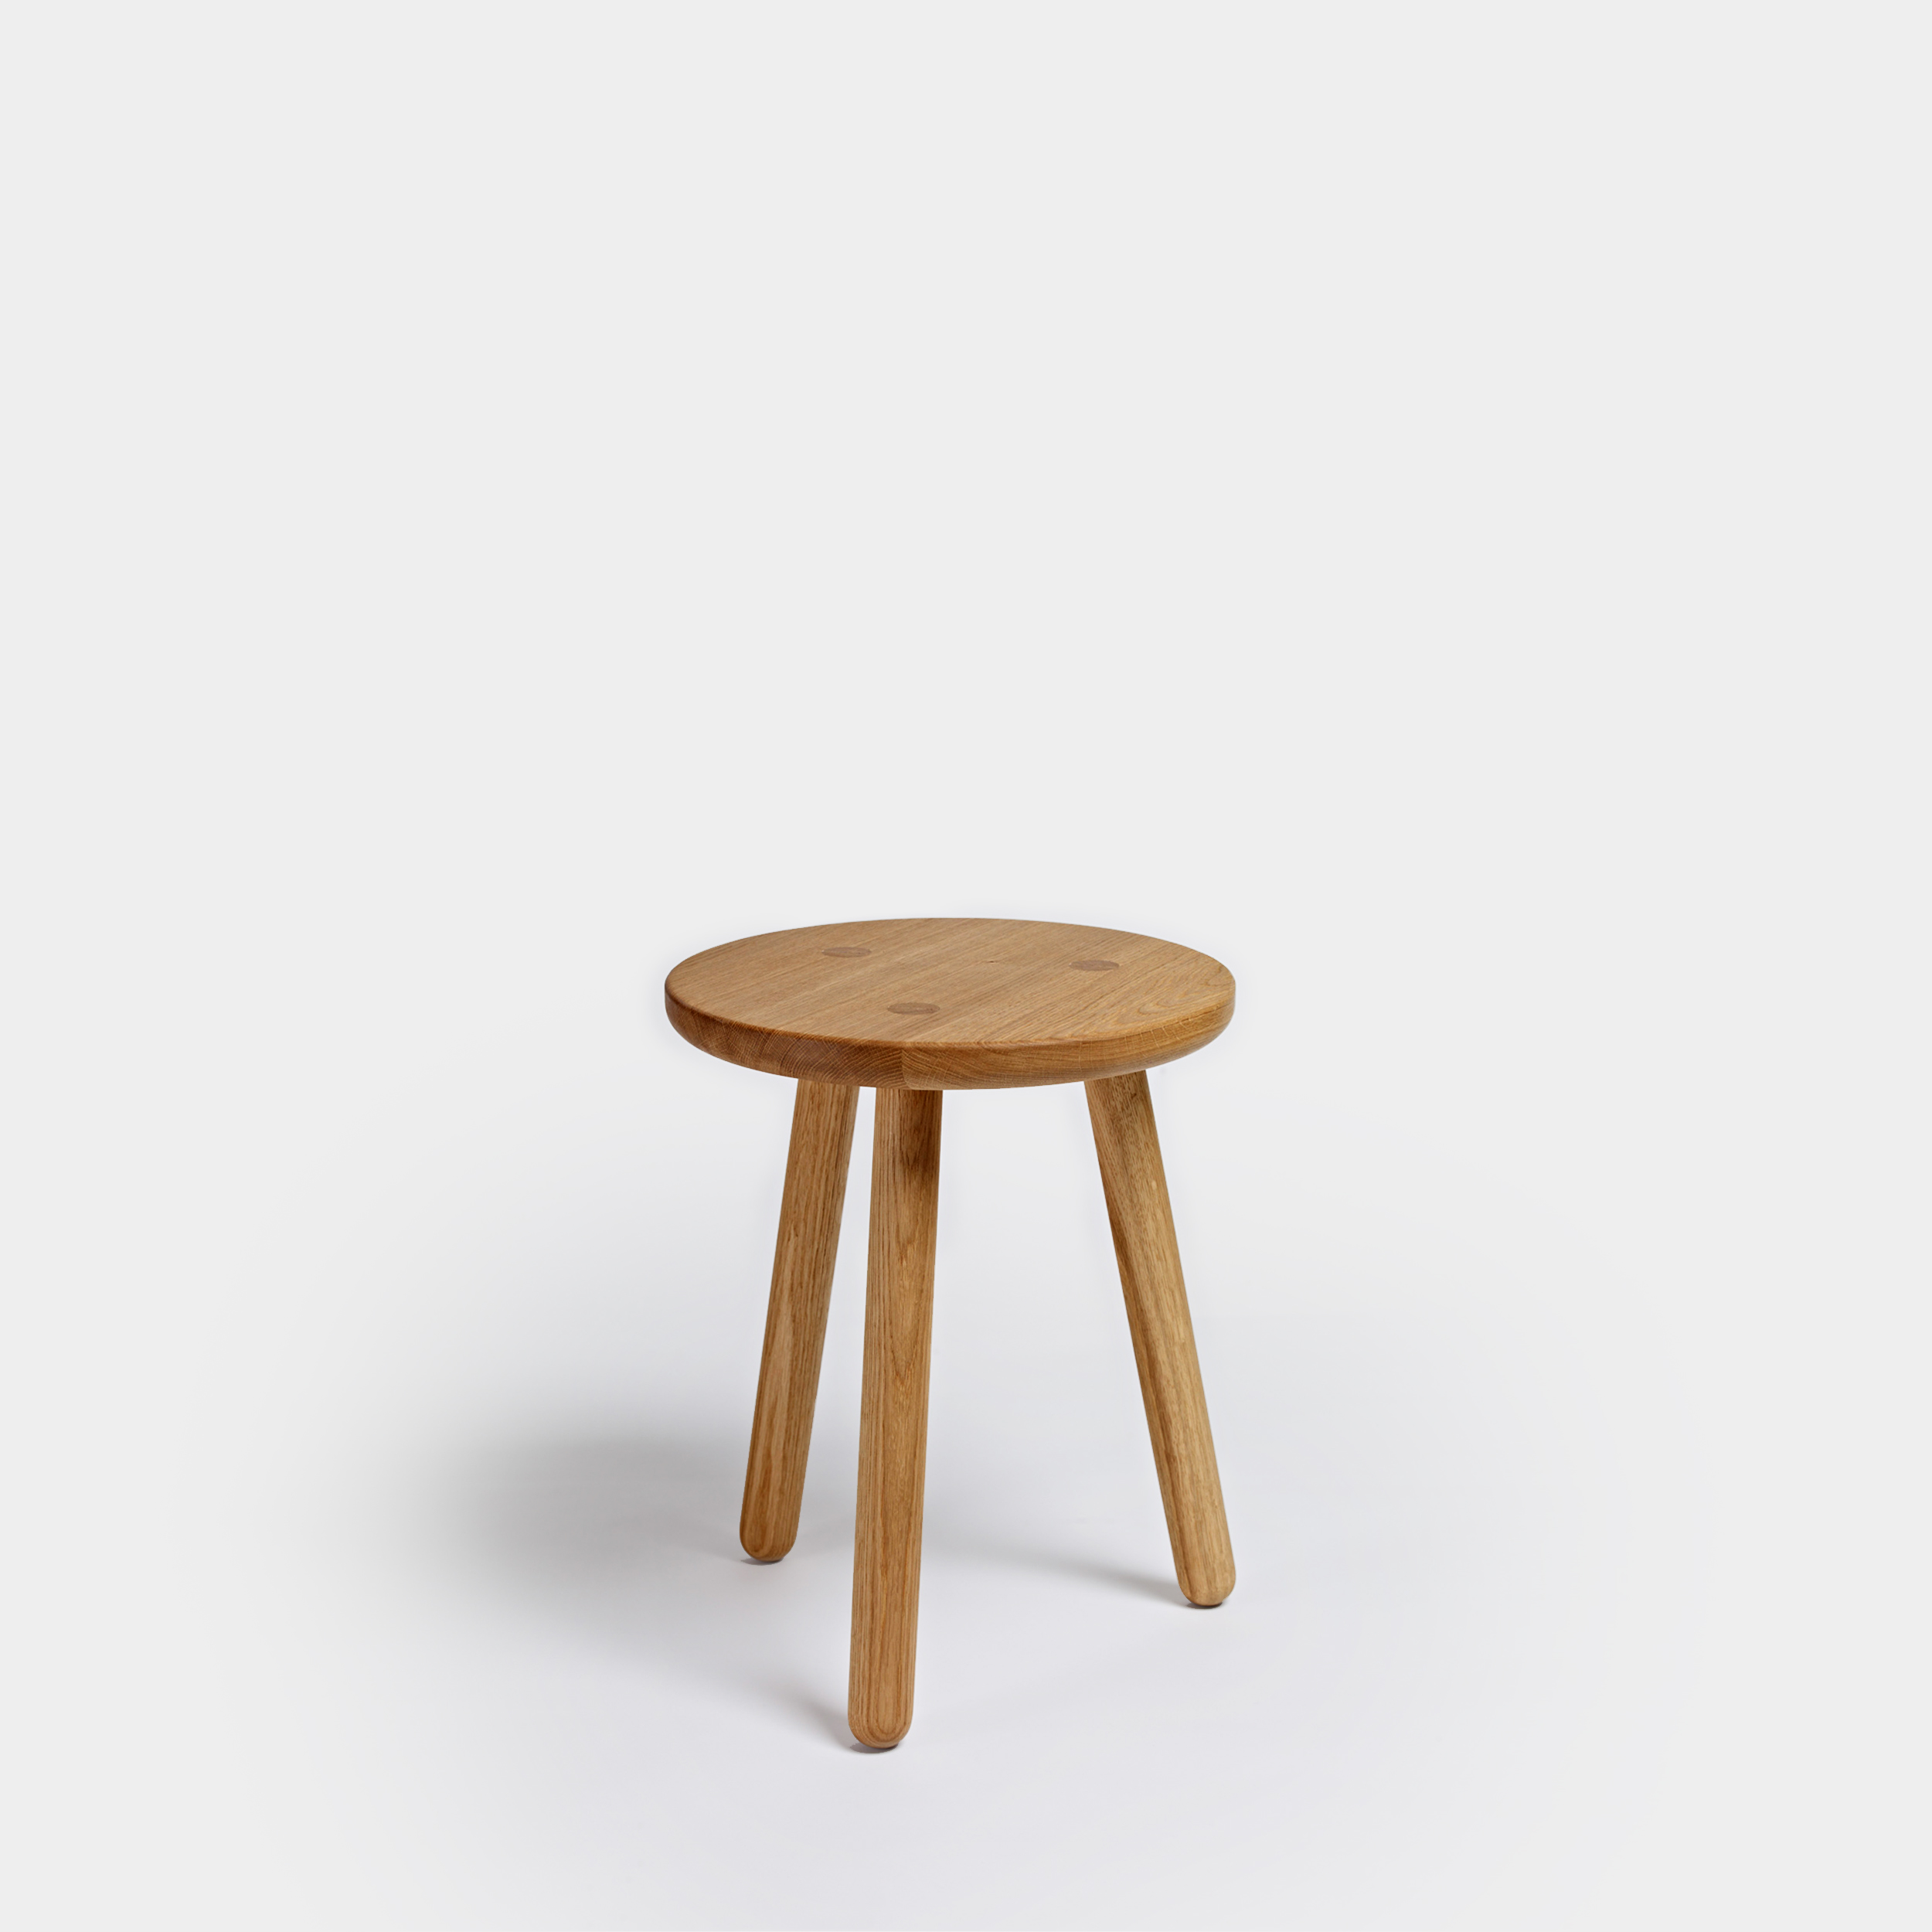 Side Table One Series Furniture, Wooden Stool Side Table